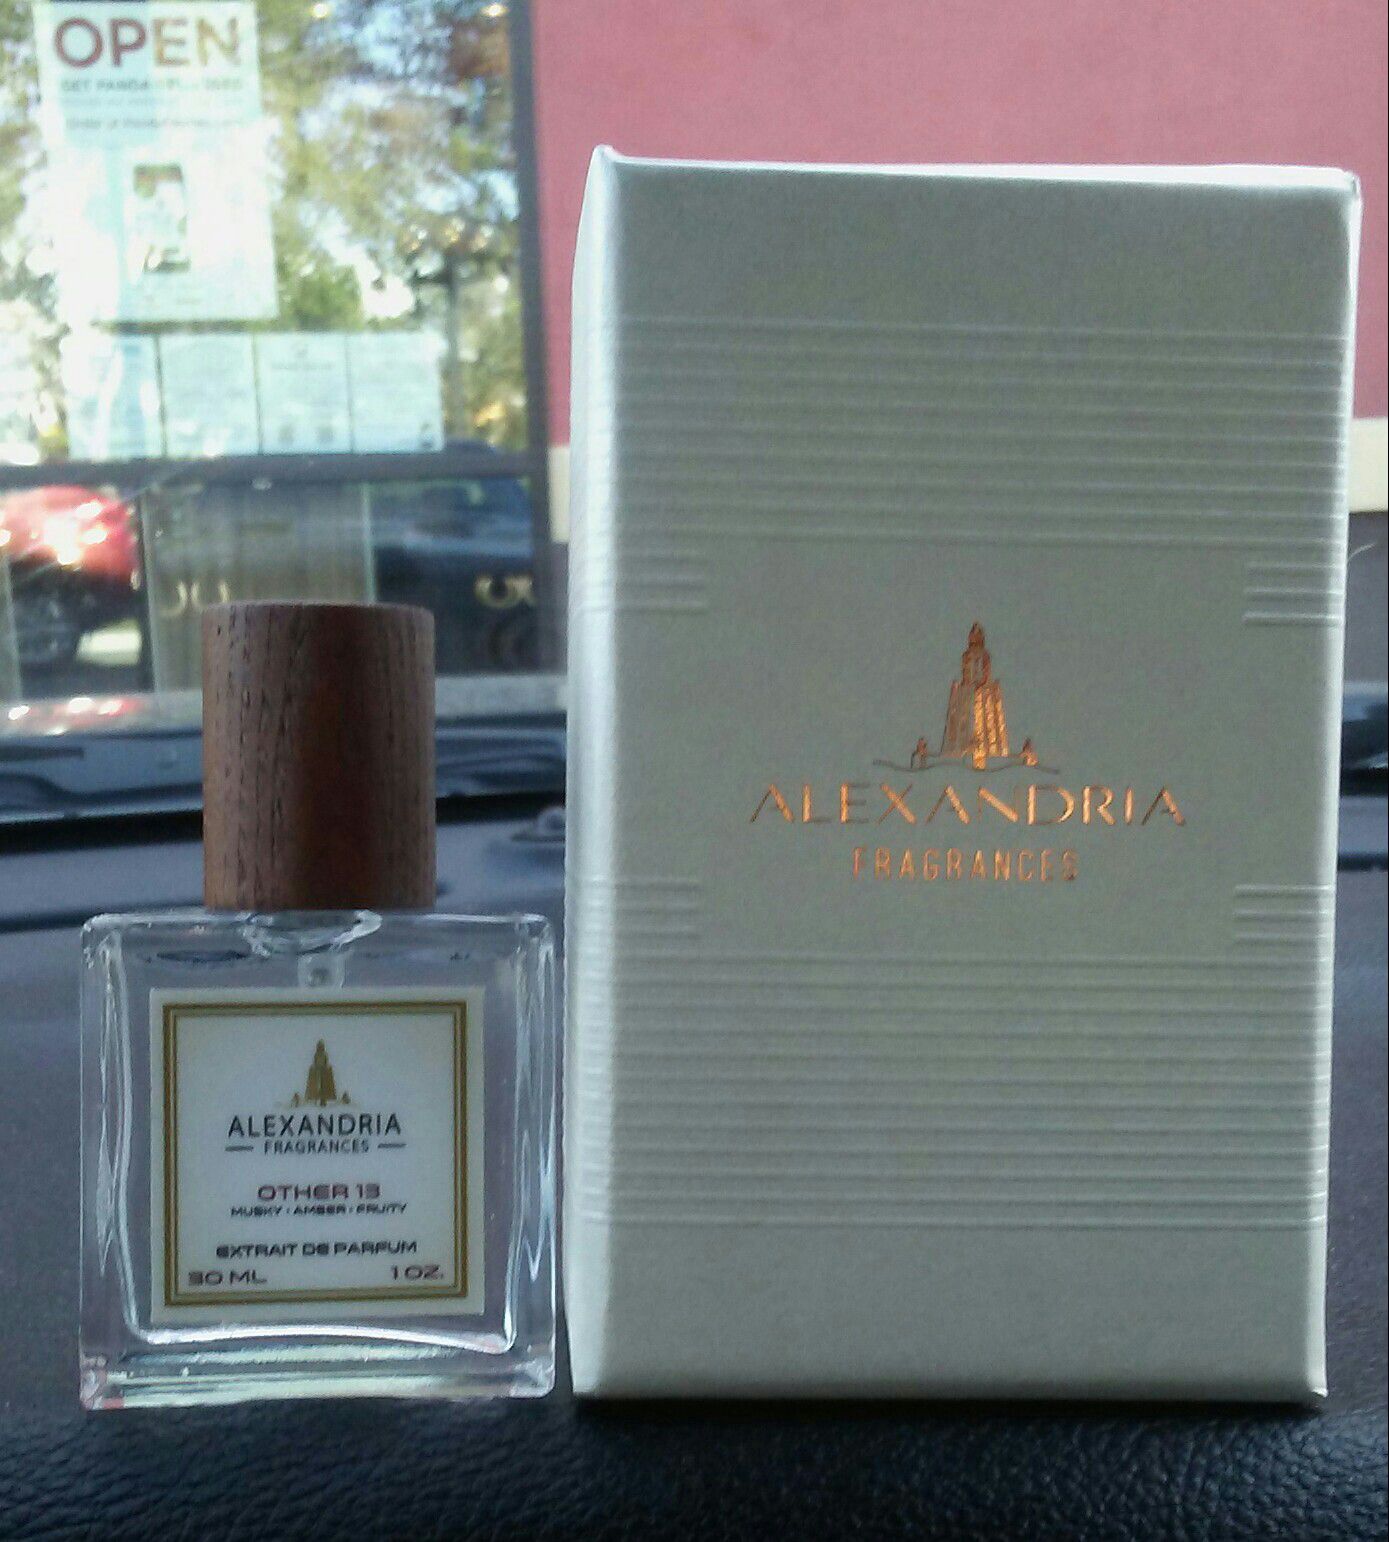 Cologne perfume fragrance Alexandria other 13